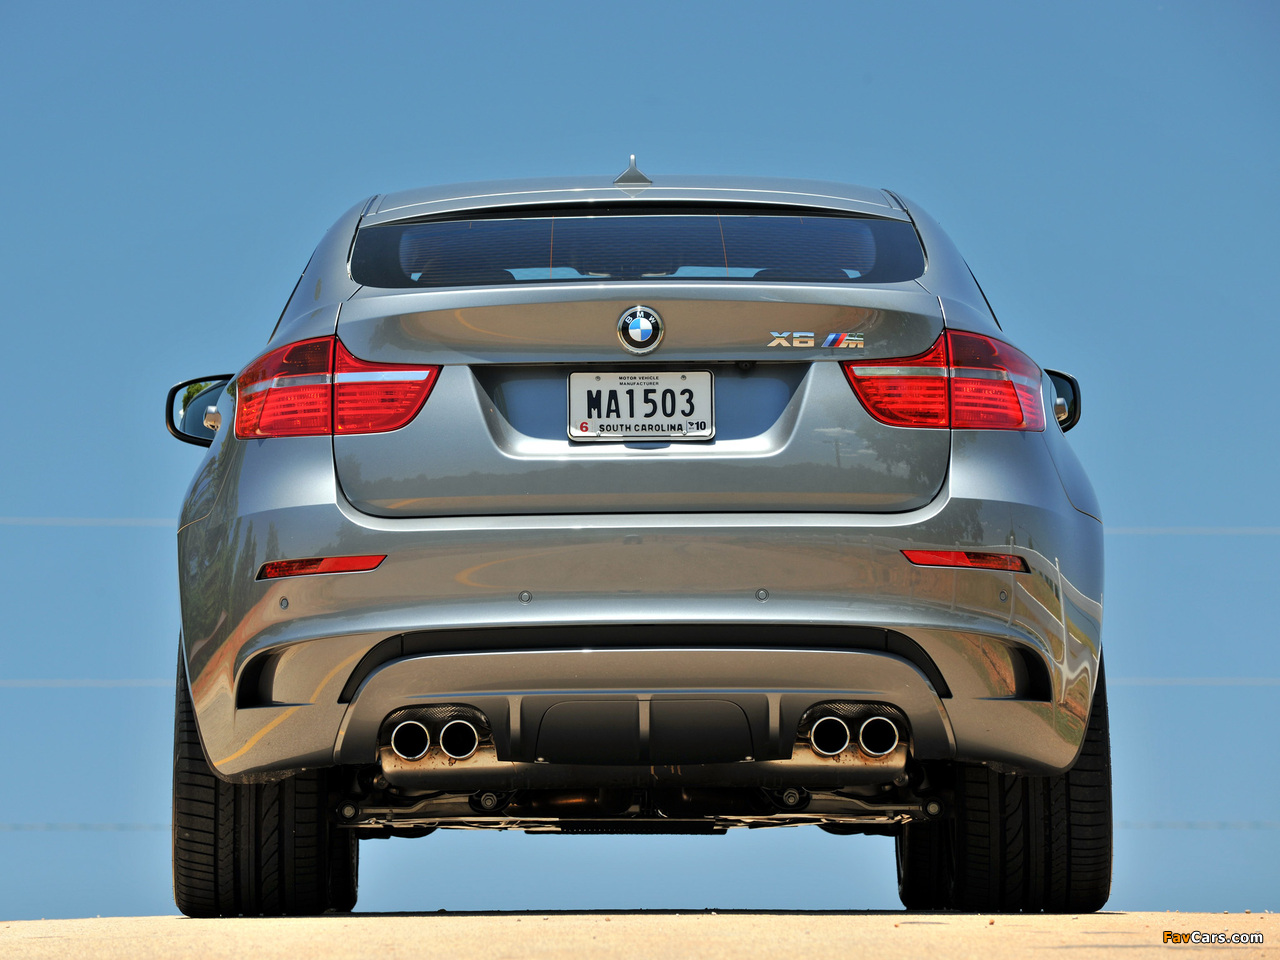 BMW X6 M (E71) 2009 pictures (1280 x 960)